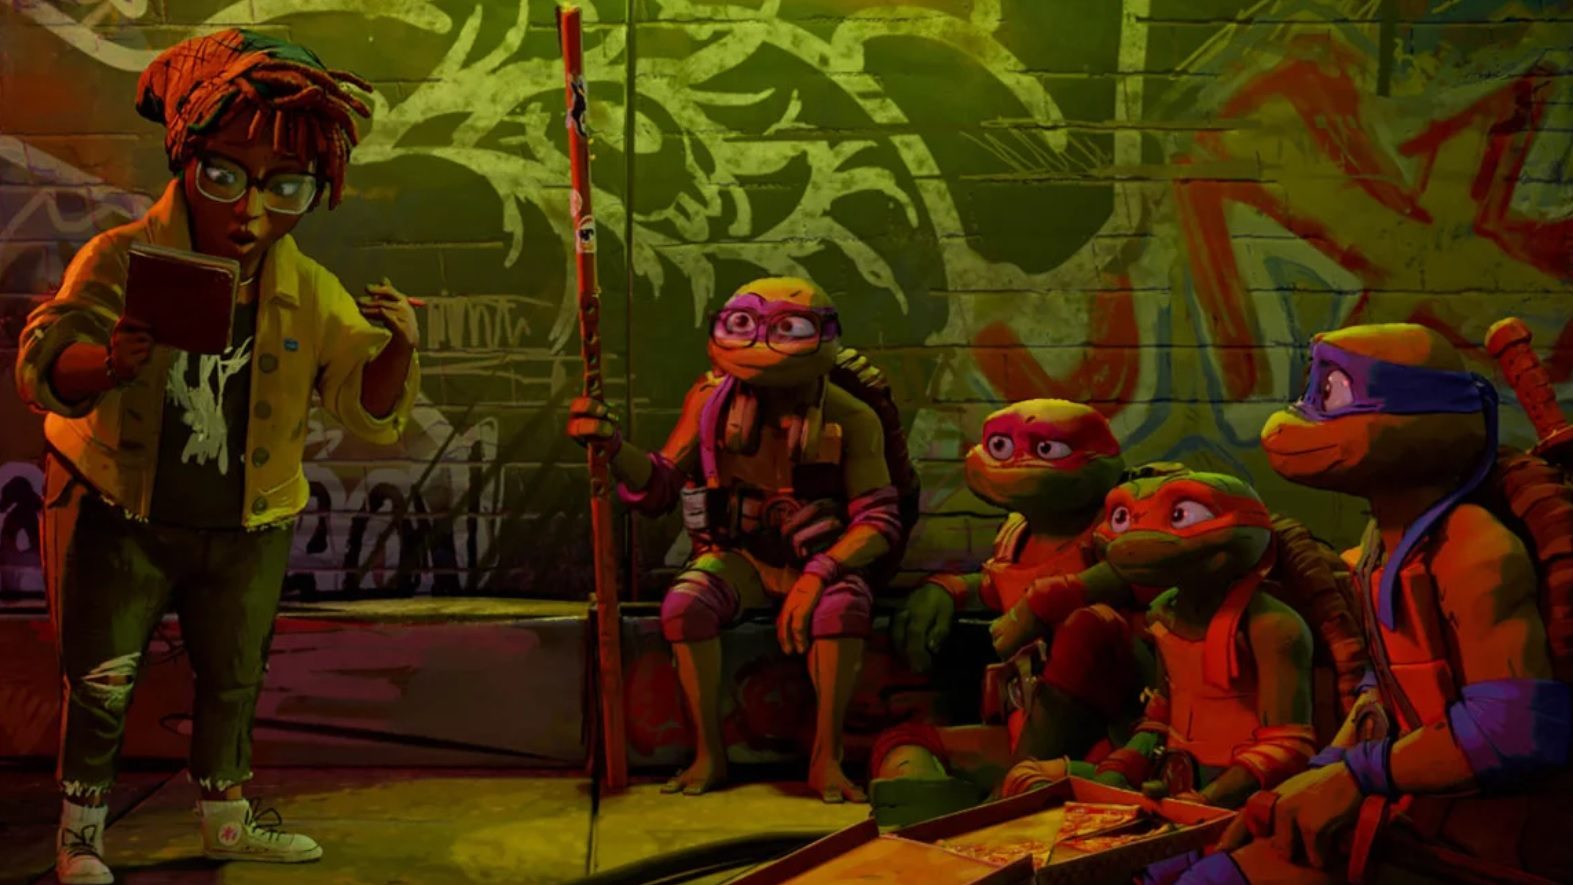 tmnt-mutant-mayhem-mpa-rating-revealed-for-animated-action-comedy